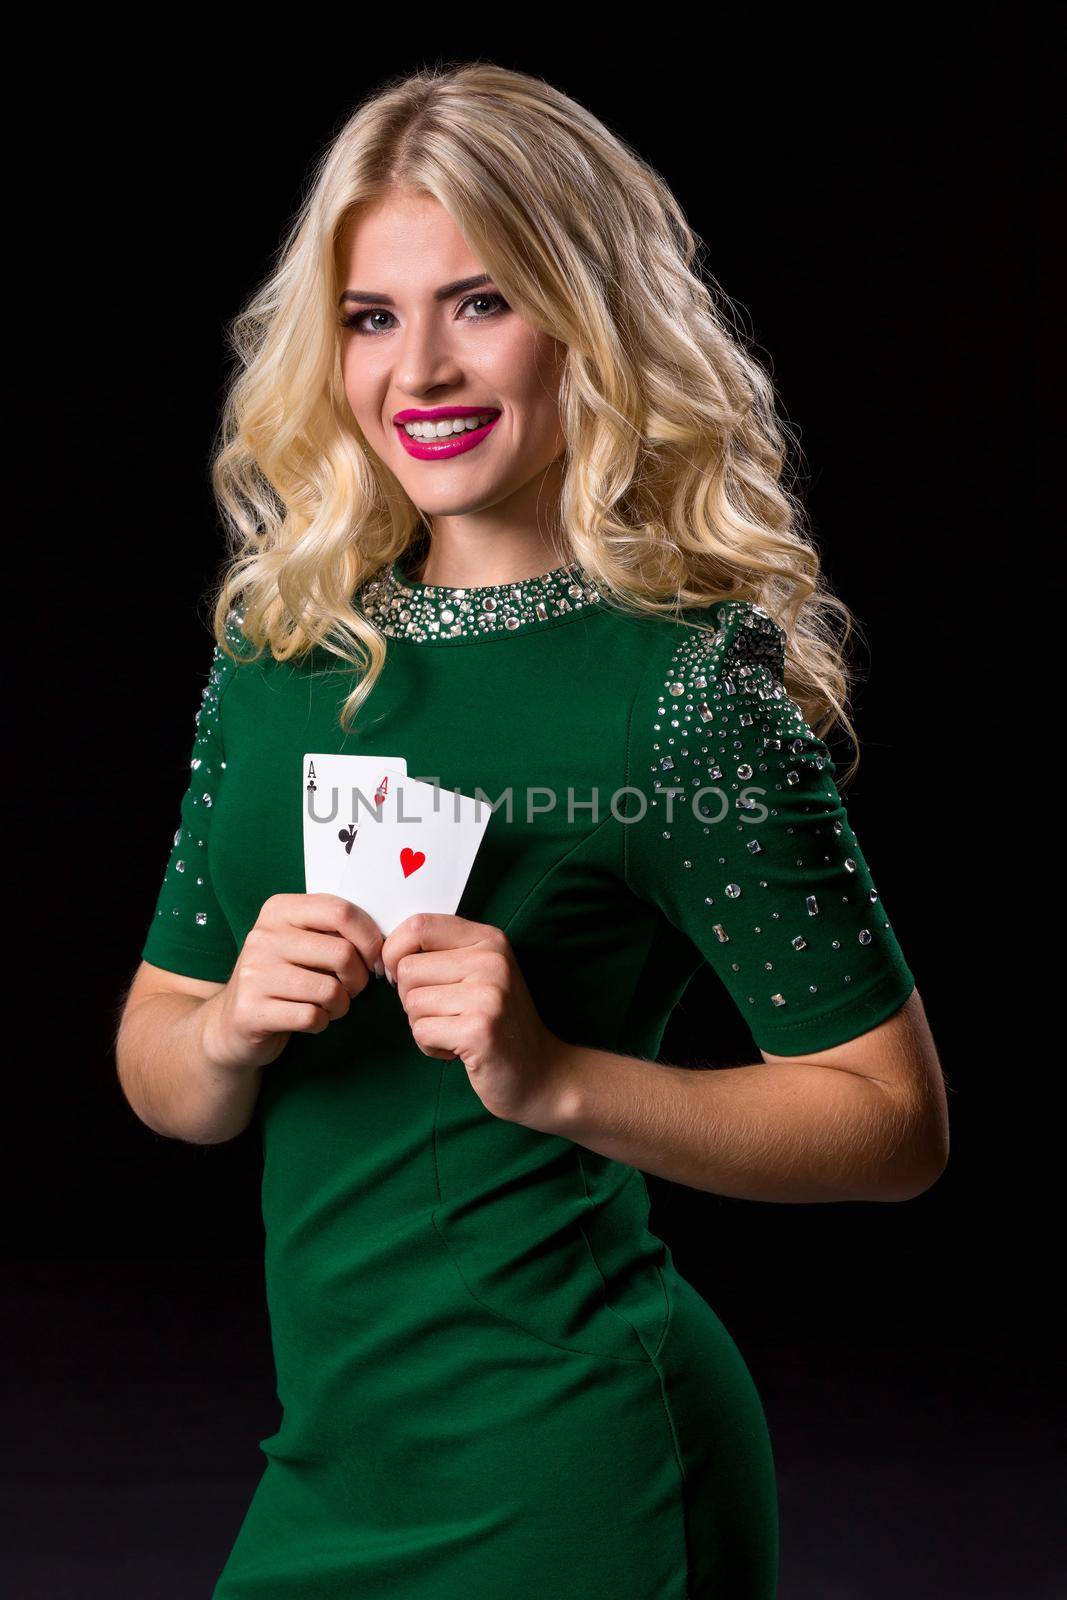 blonde woman in posing with cards by nazarovsergey